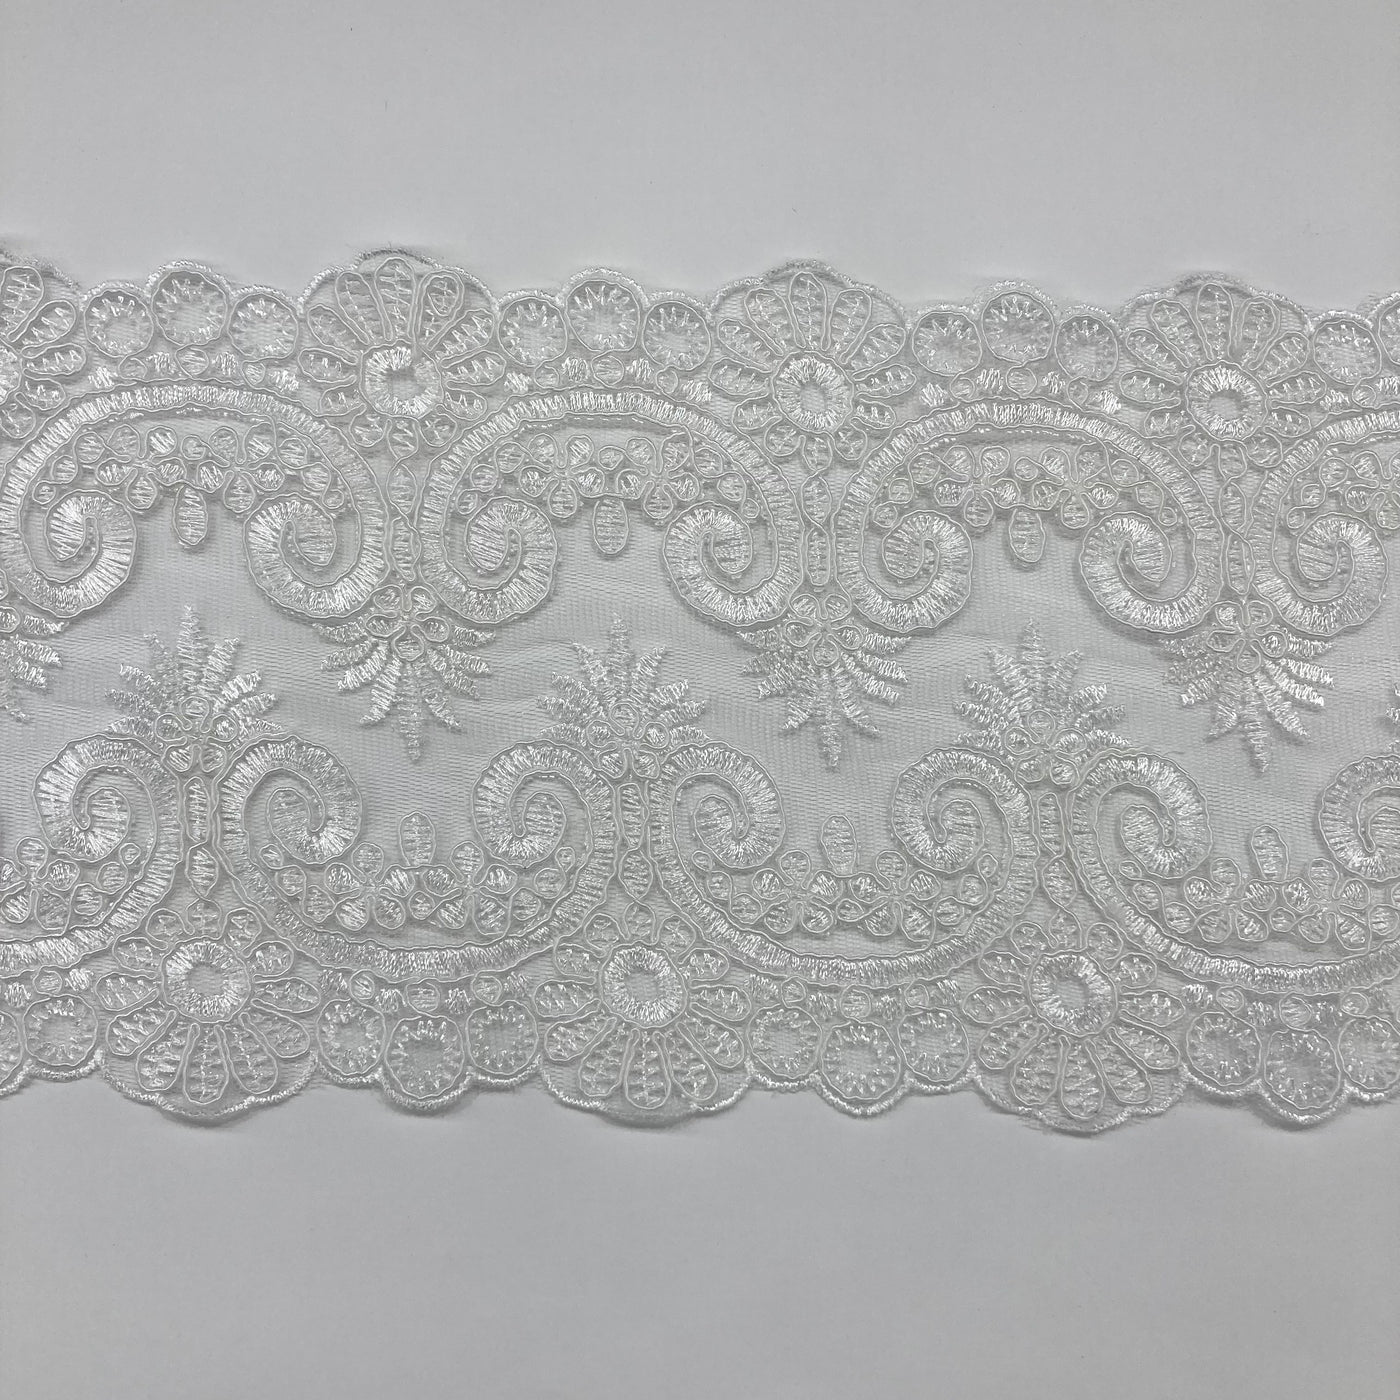 Corded & Embroidered White Double Sided Trimming on Mesh Net Lace. Lace Usa